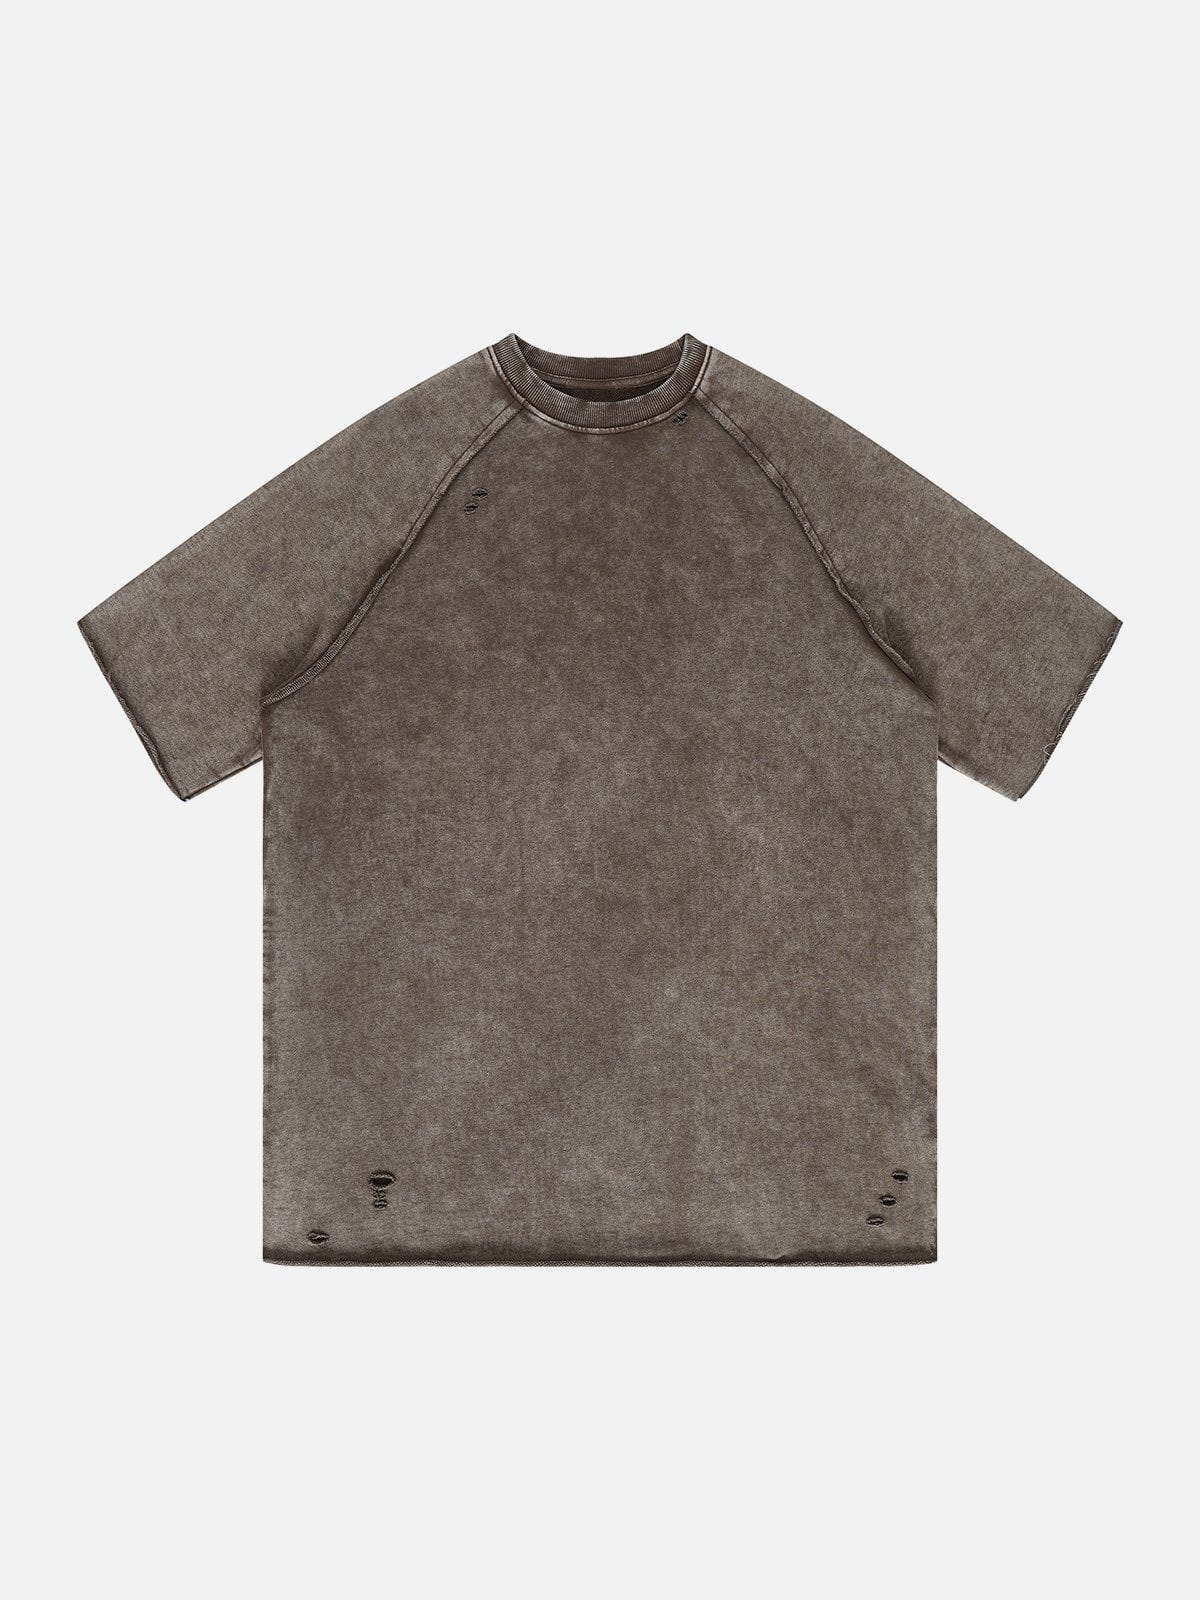 Sneakerland™ - Solid Washed Essential Tee